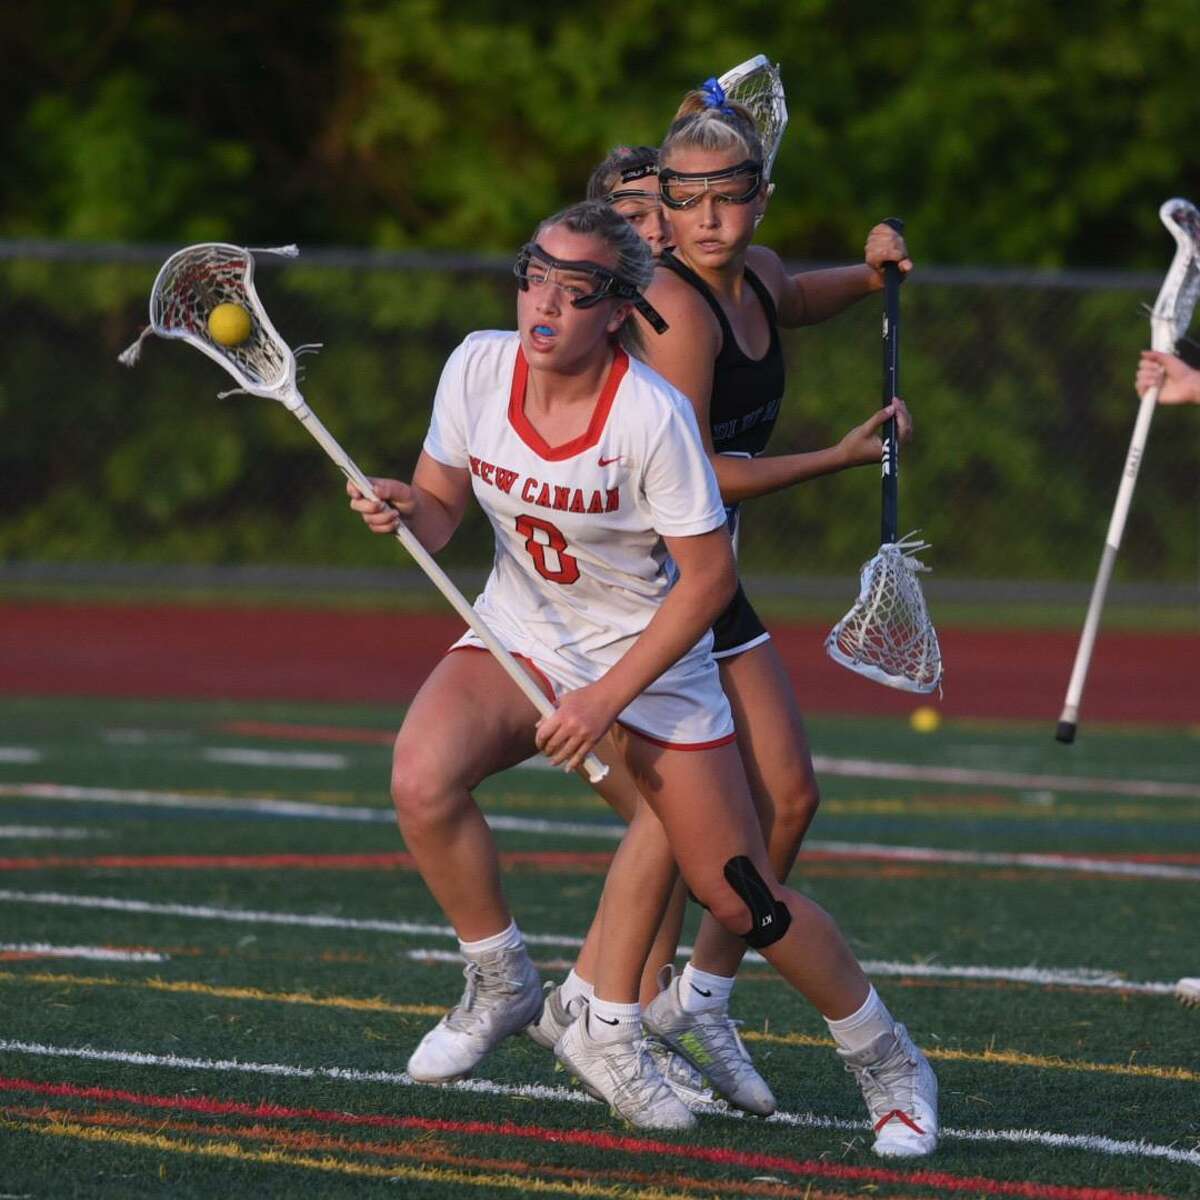 New Canaan’s Devon Russell carries the ball in front of Darien’s Molly McGuckin during the FCIAC girls lacrosse championship on Wednesday in Norwalk. For a full recap, go to CTInsider.com/sports.